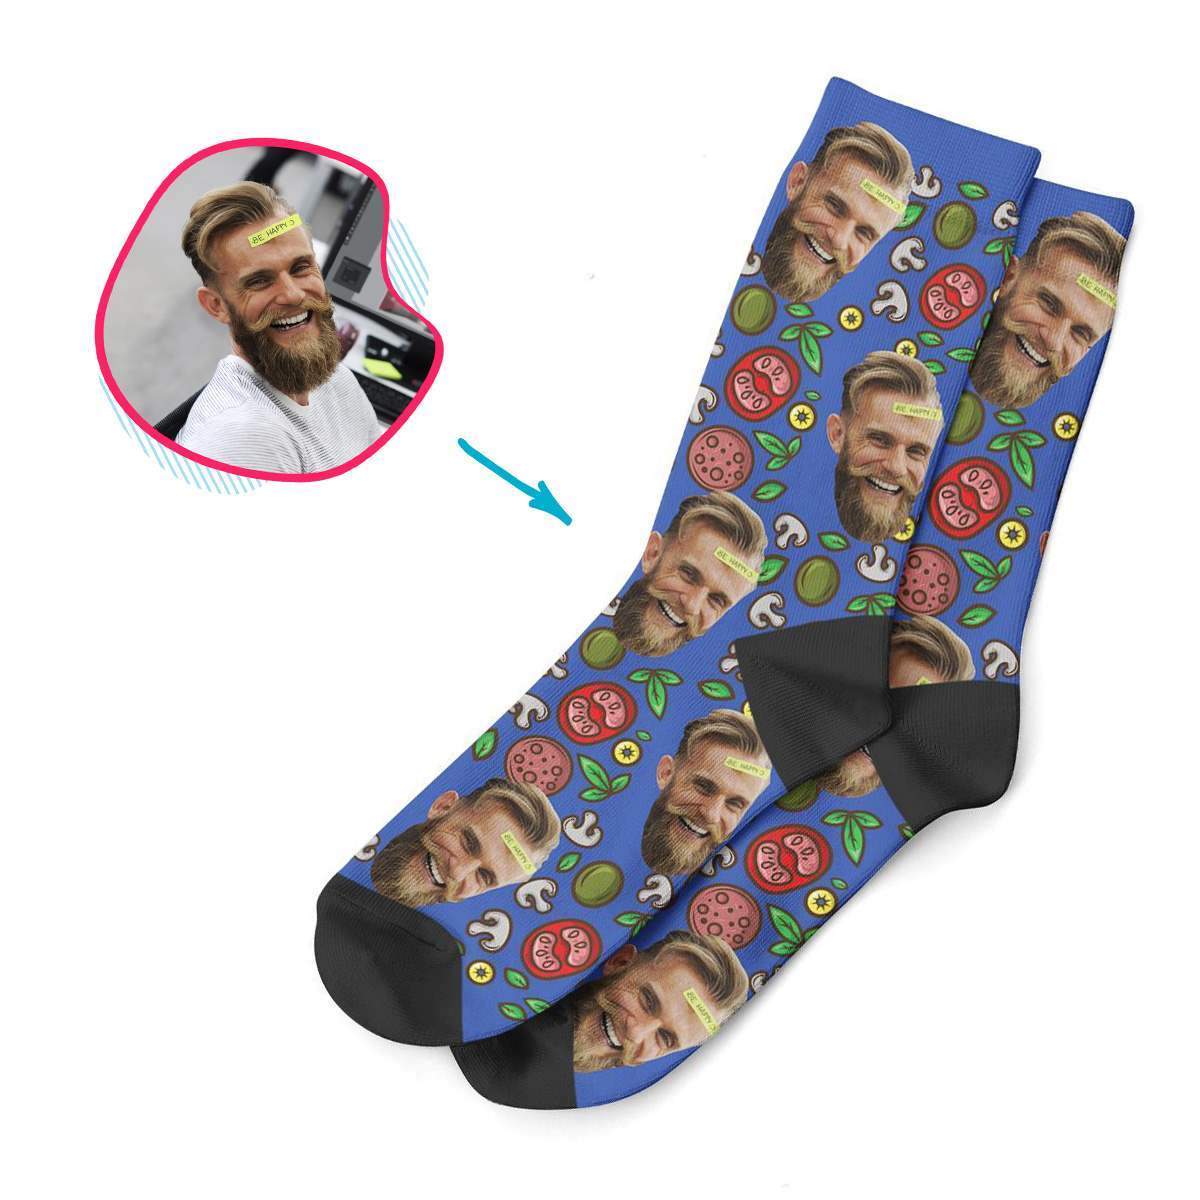 darkblue Pizza socks personalized with photo of face printed on them